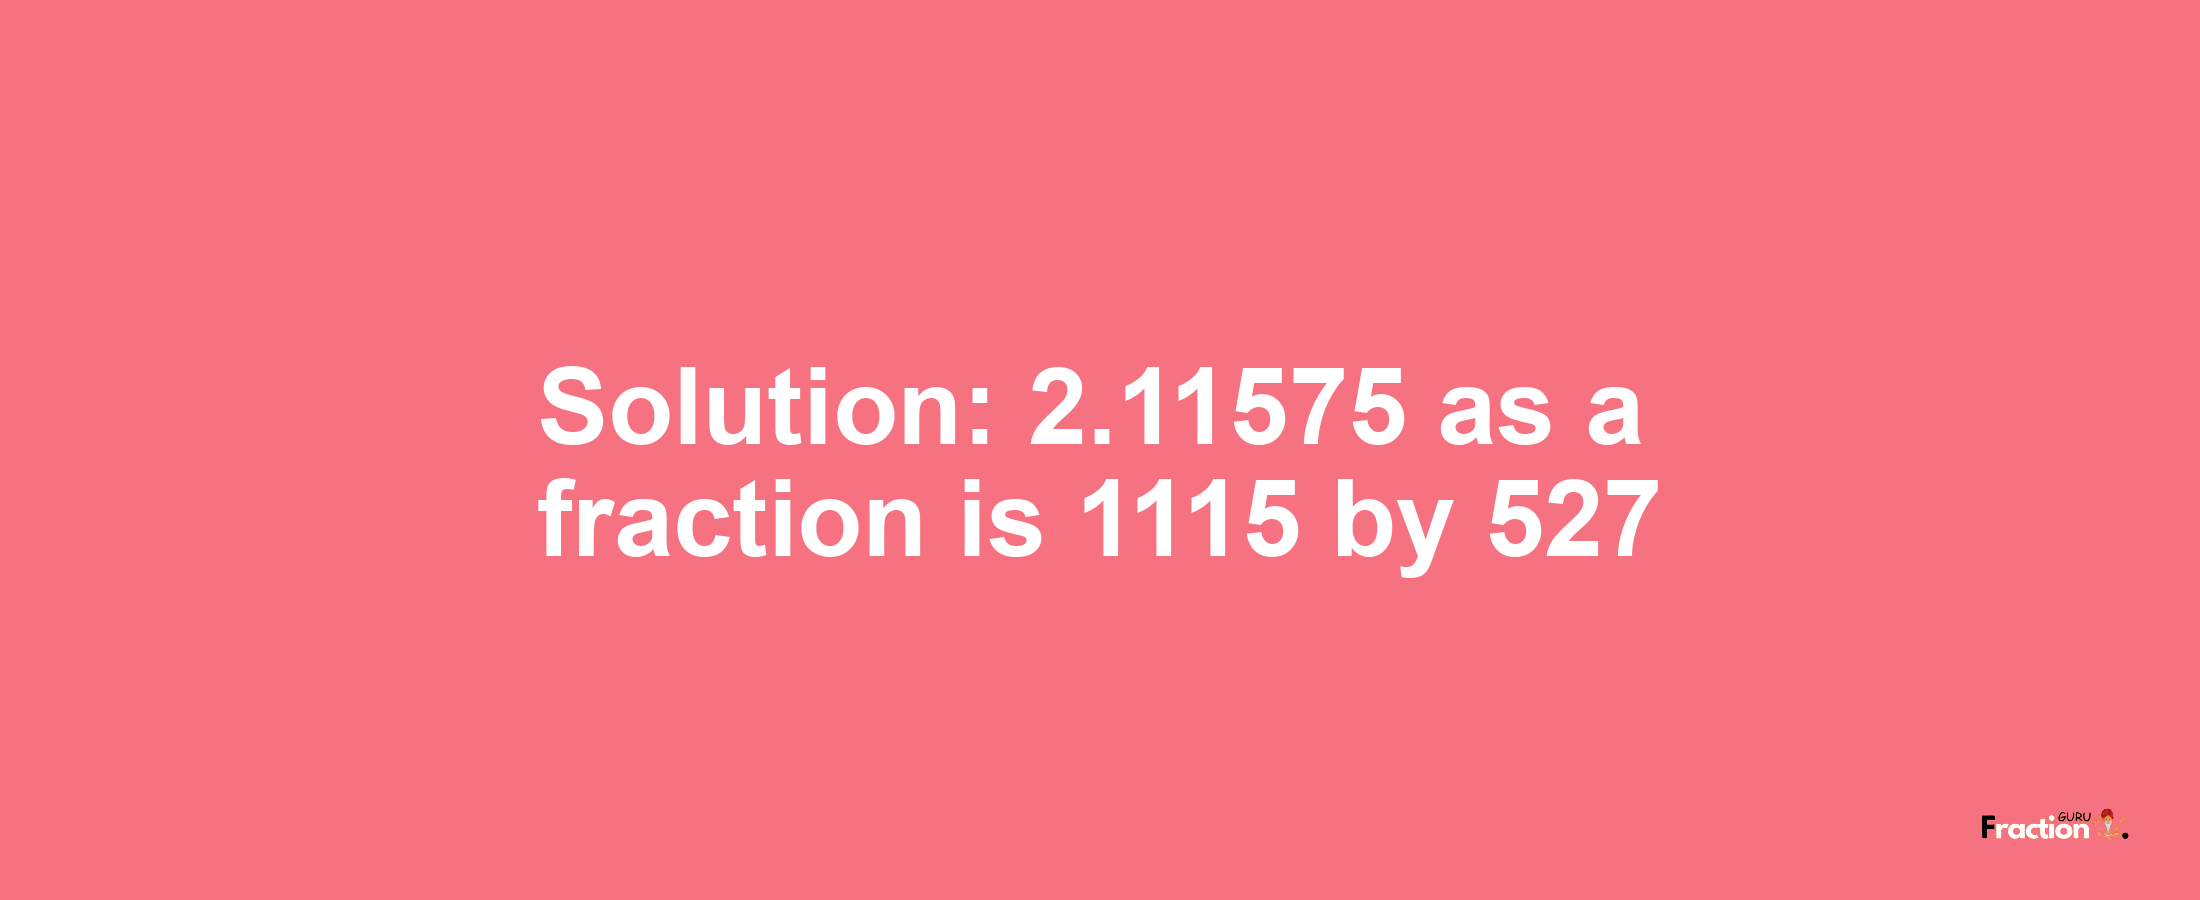 Solution:2.11575 as a fraction is 1115/527